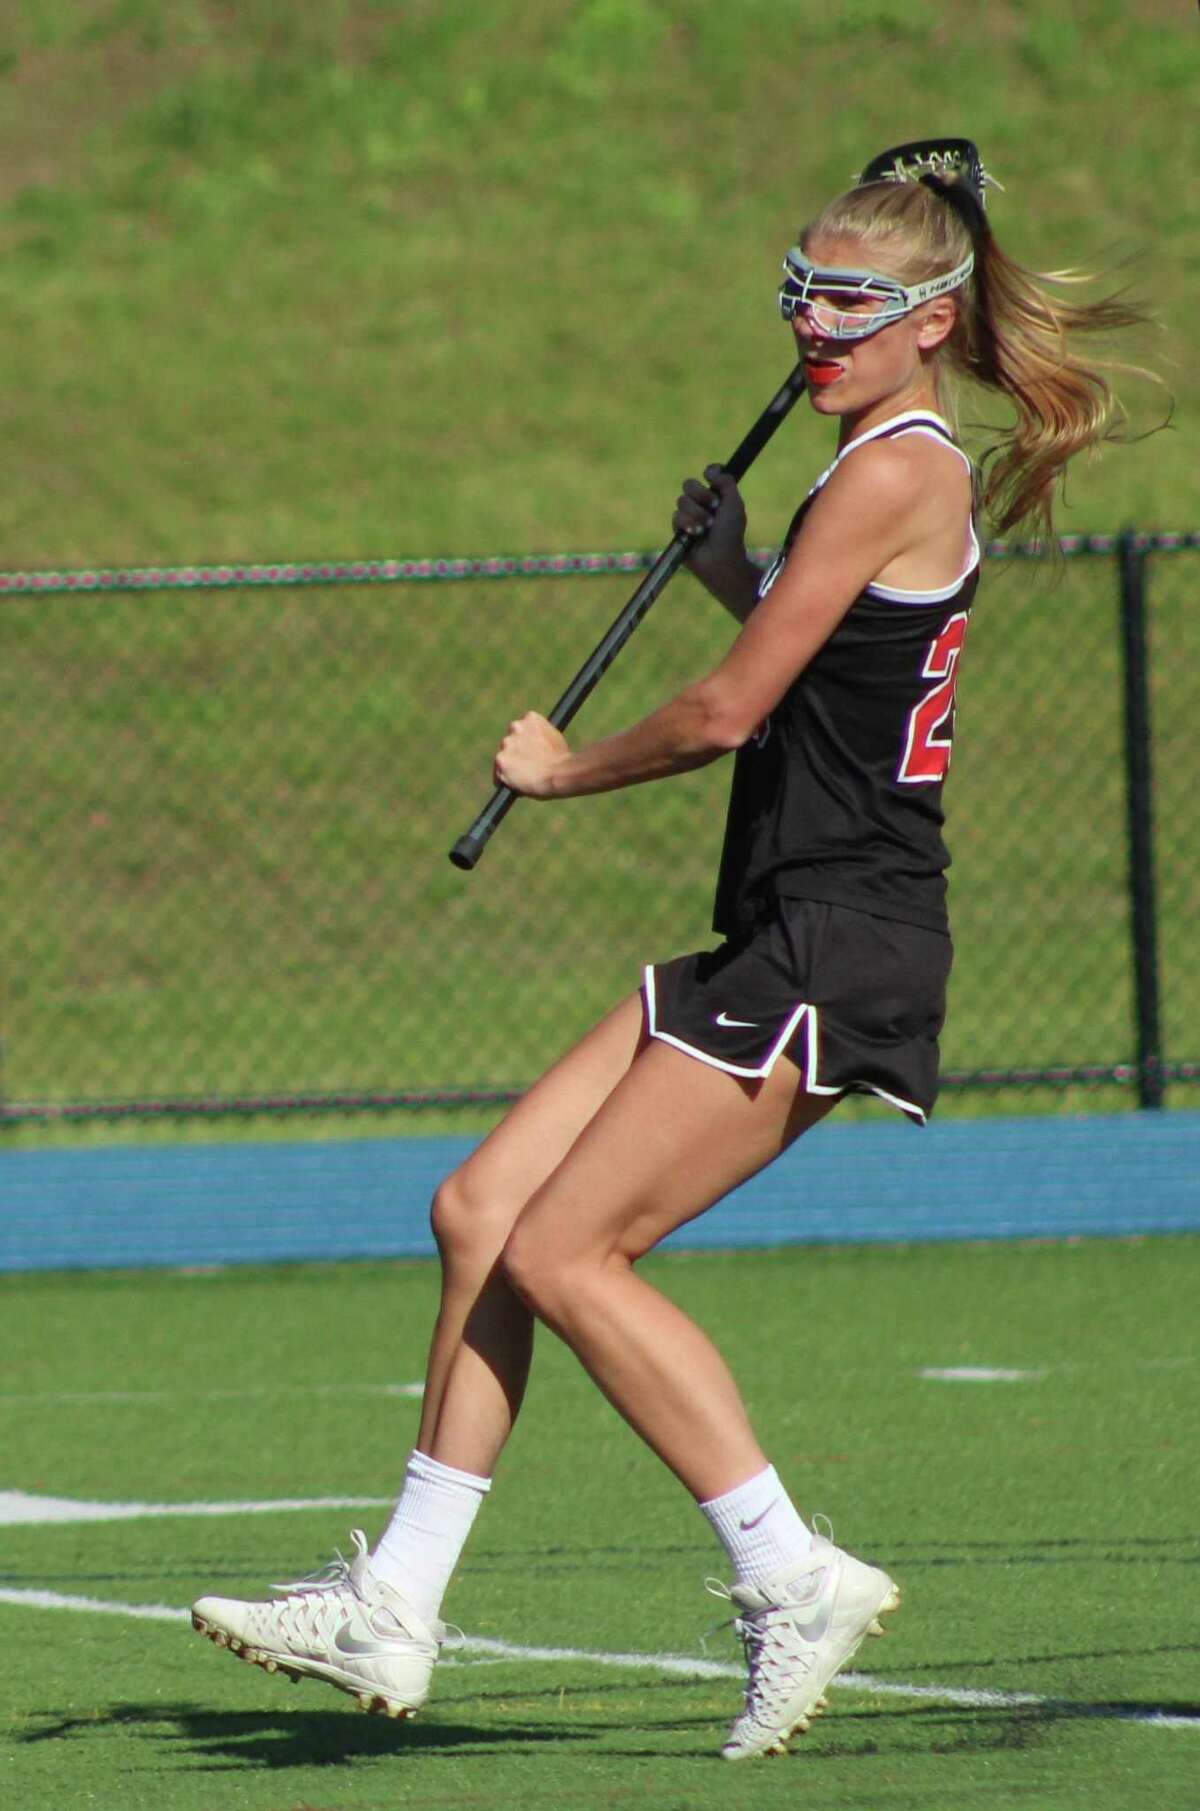 New Canaan's Campbell Armstrong in action during the Class L state girls lacrosse tournament quarterfinal game against Newtown at Newtown High School June 1.